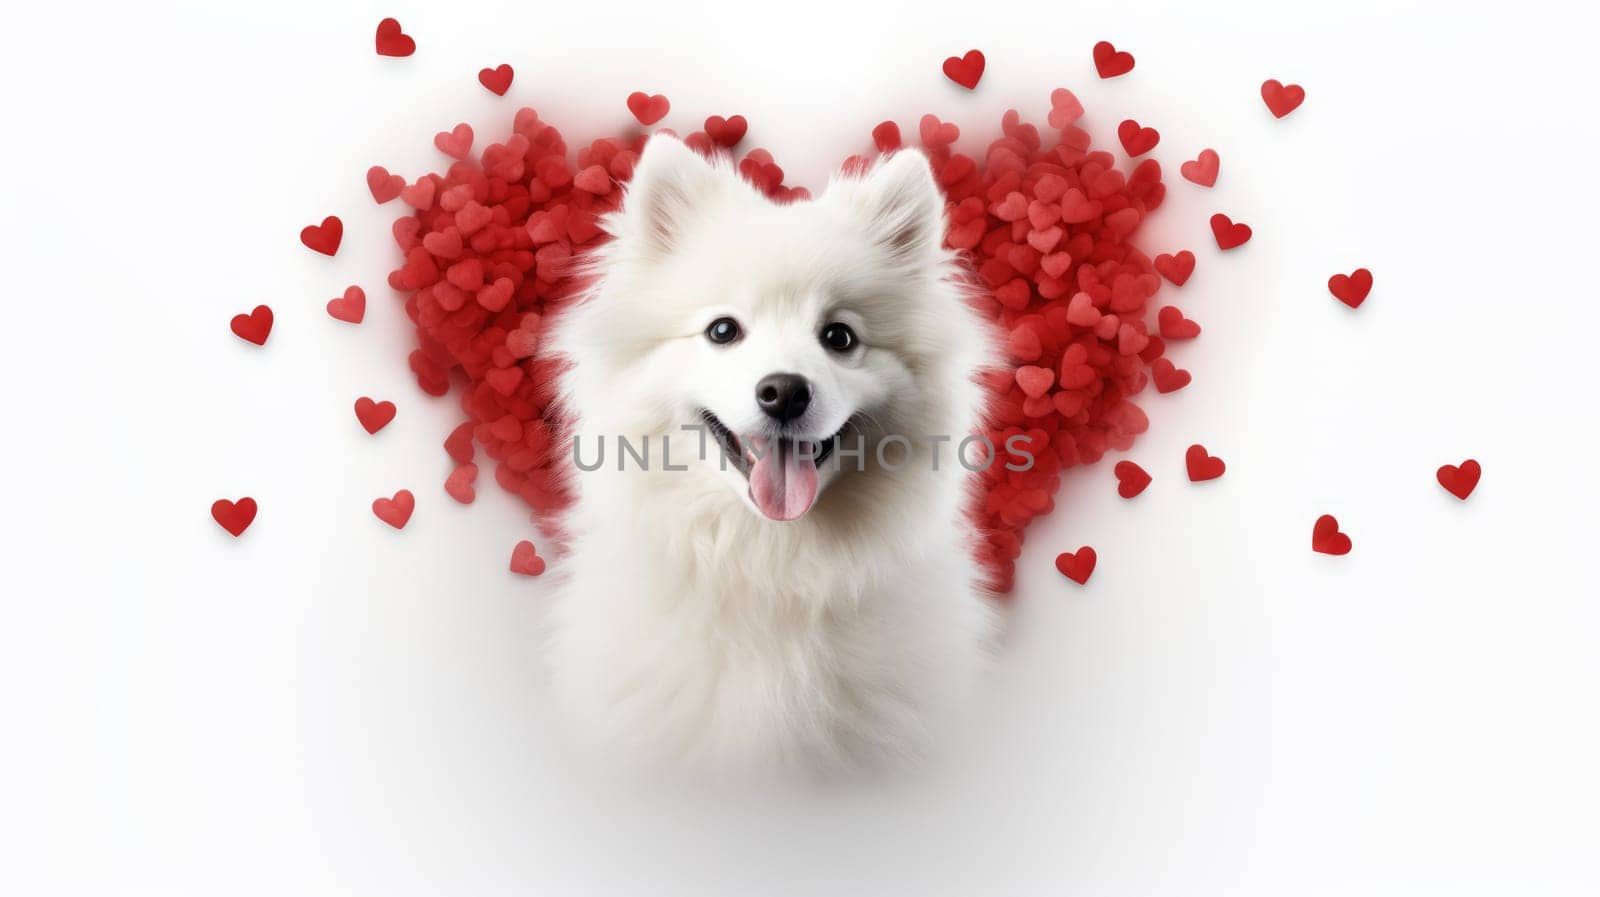 Happy cute small dog with red hearts on white background celebrating Valentine day. Valentine's day, birthday, mother's, women's day, holidays concept. by JuliaDorian